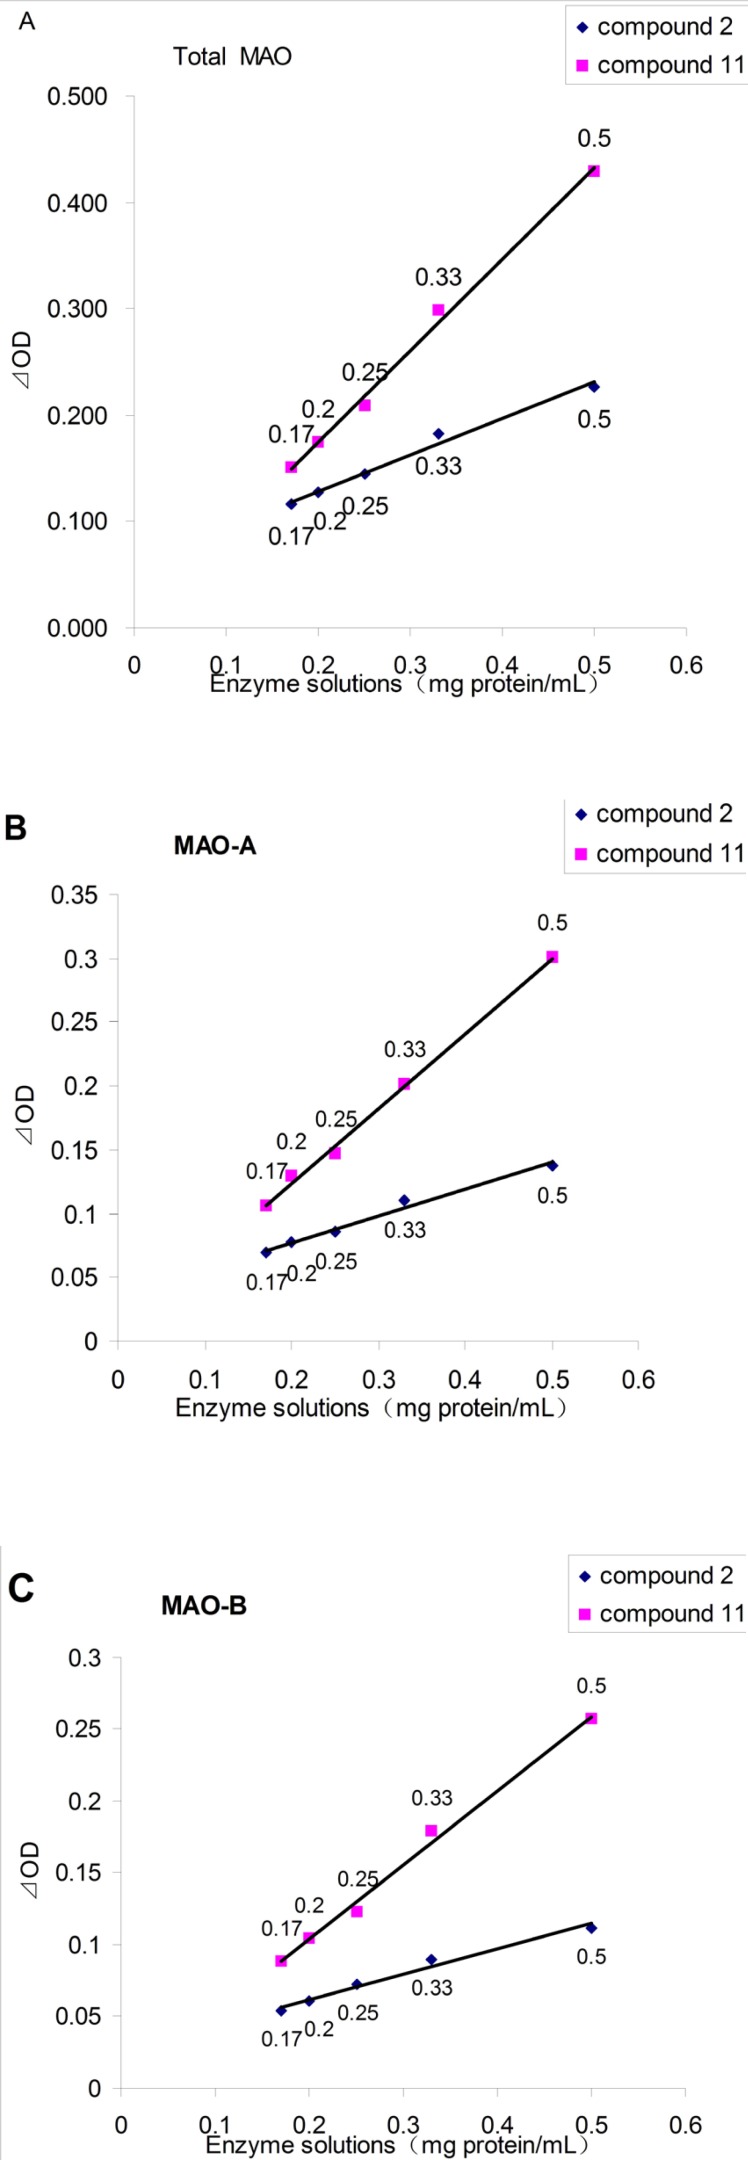 The effect of enzyme solutions concentration on the ⊿OD, as assayed by the spectrophotometric assay. A: for Total MAO; B: for MAO-A (add pargyline to inhibit MAO-B); C: for MAO-B (add clorgyline to inhibit MAO-A).